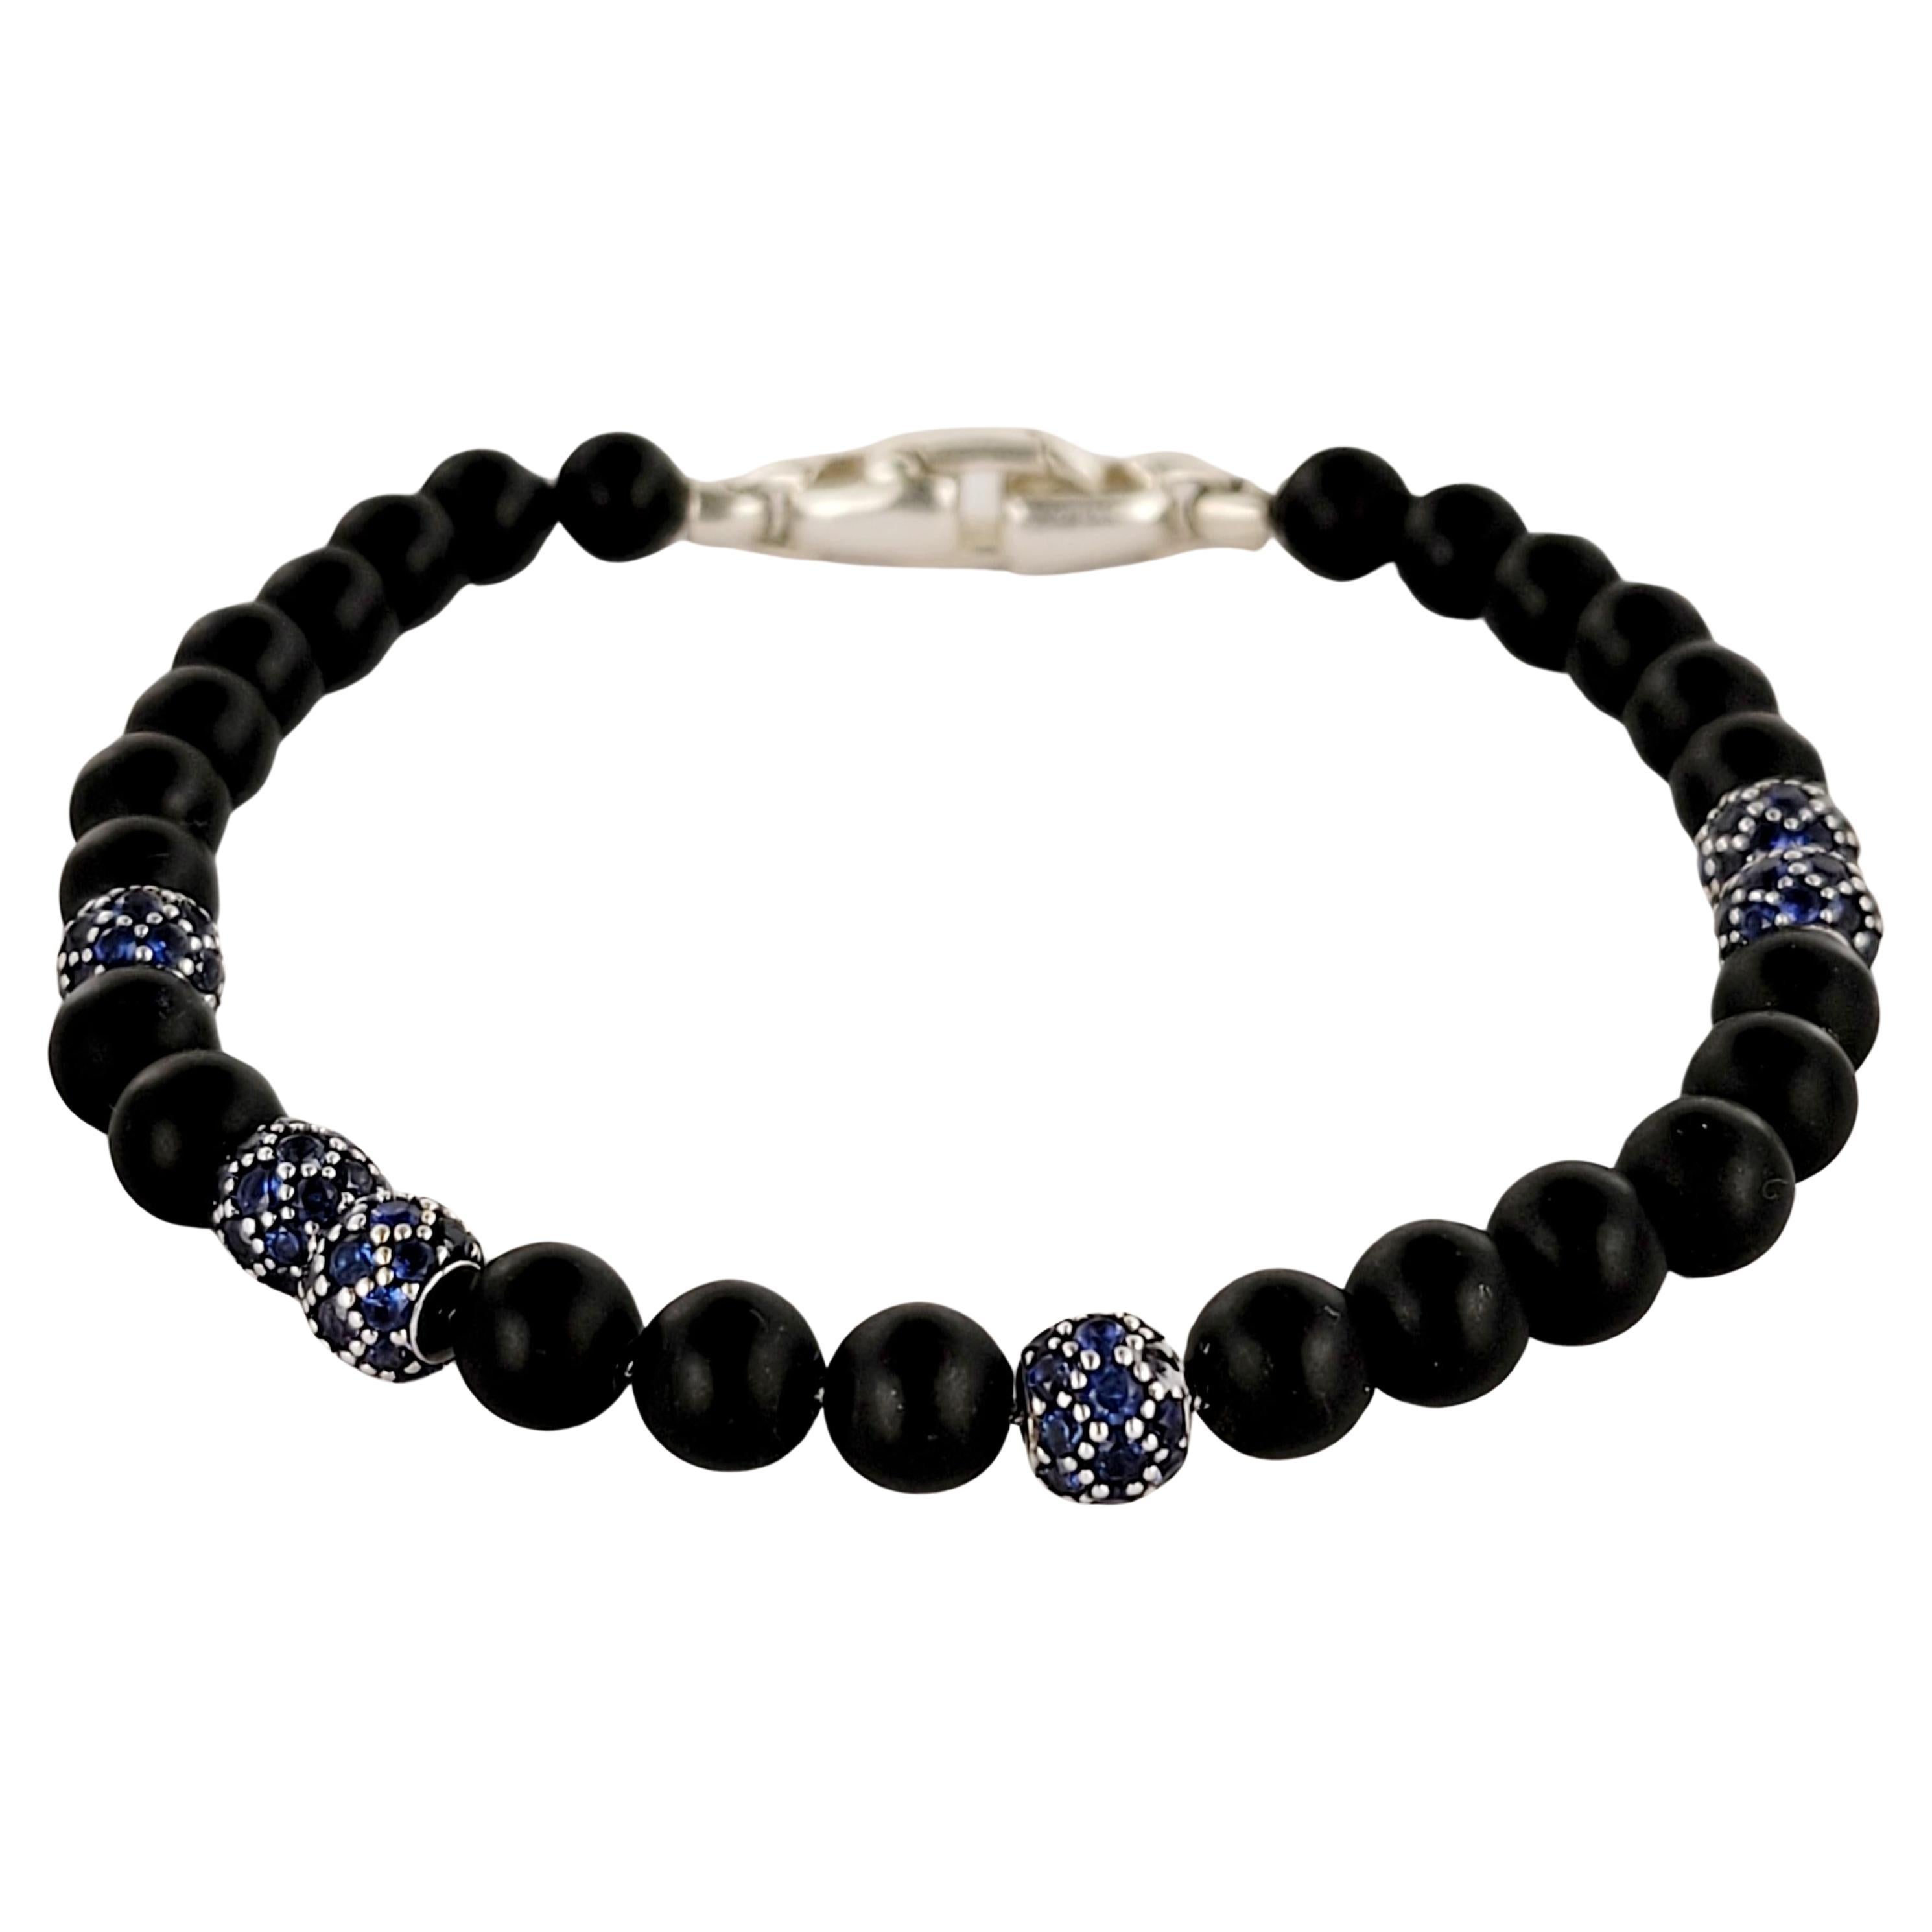 Spiritual Beads Bracelet Sterling Silver with Black Onyx and Pave Sapphires, 6mm For Sale